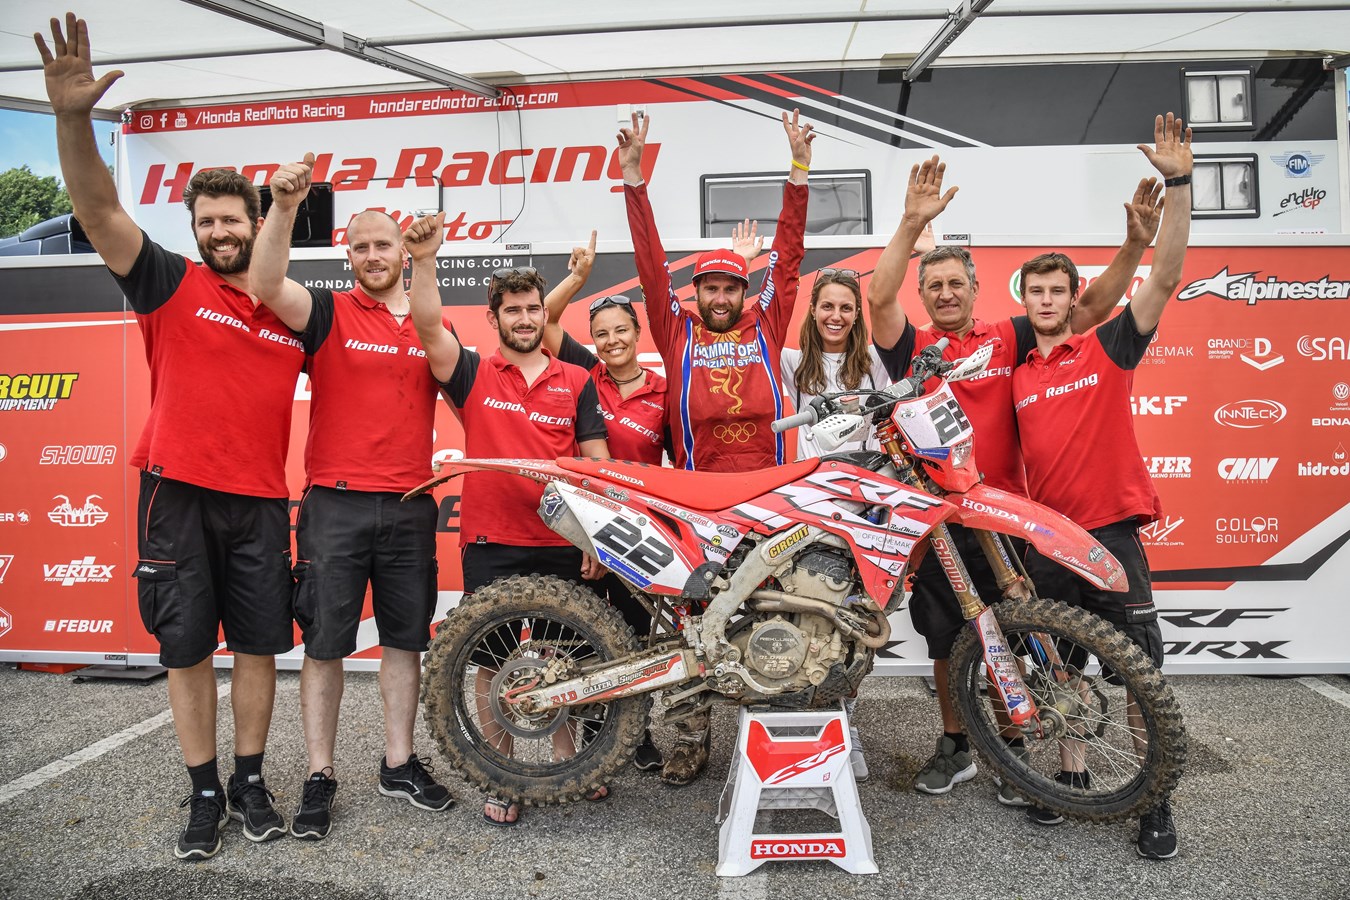 Mixed weekend for Honda riders at fifth round of Enduro Italian Championship